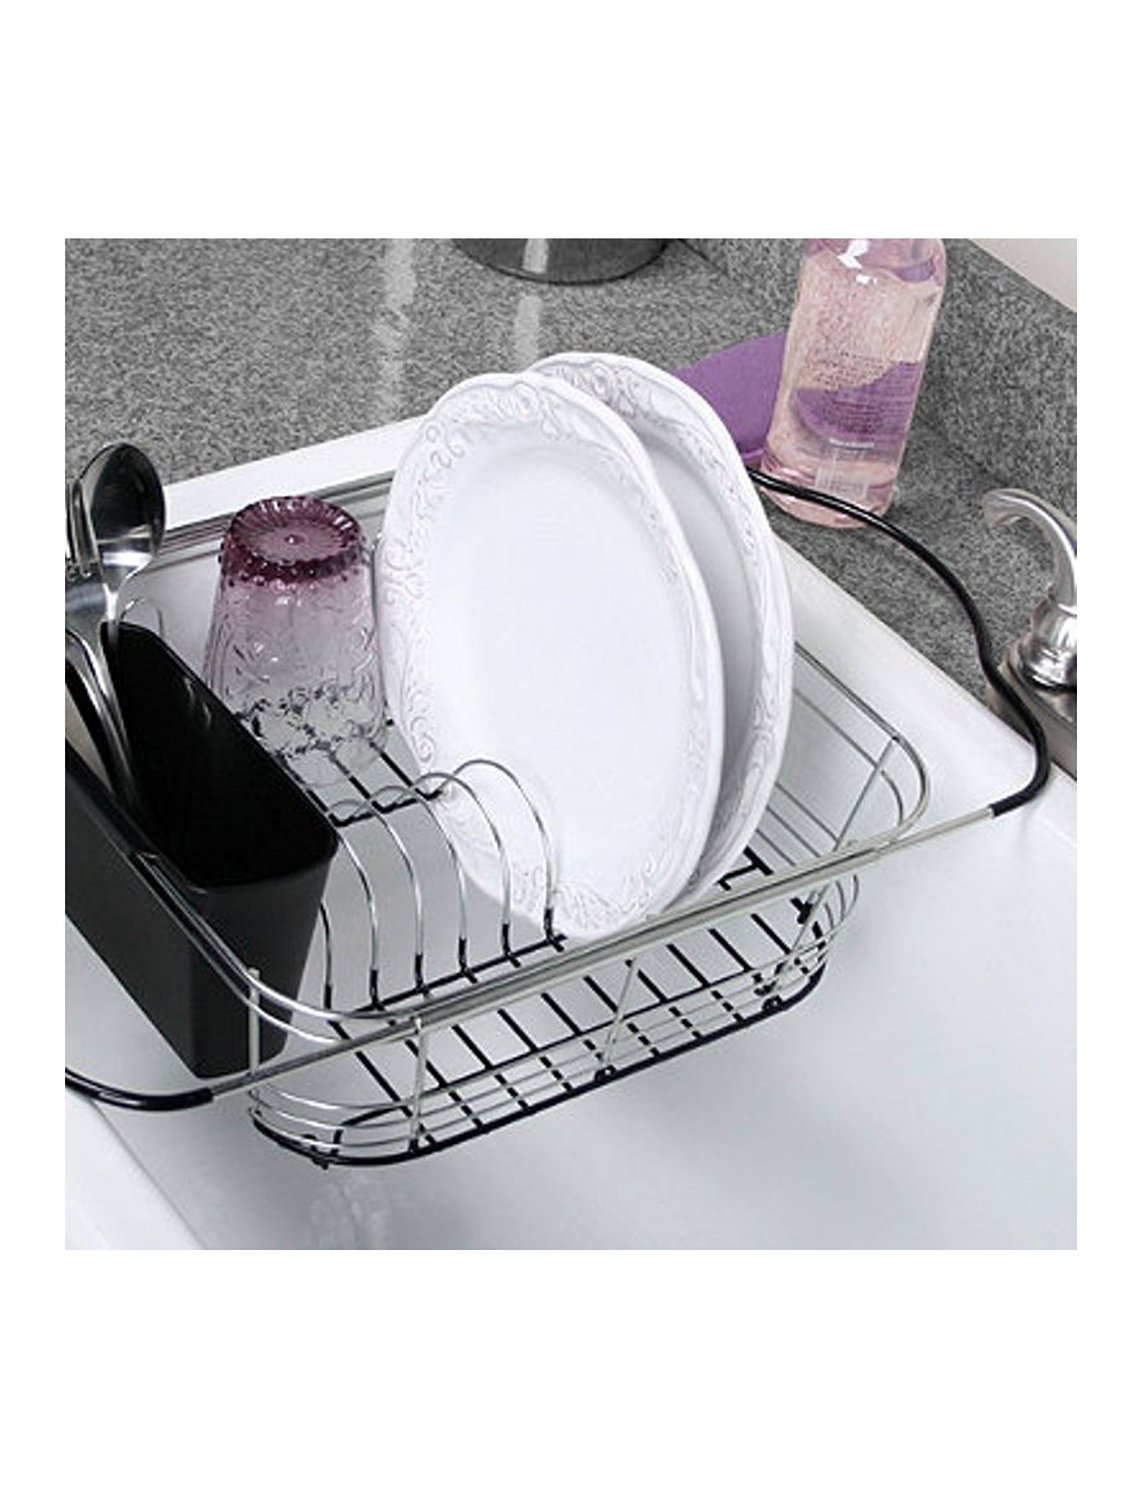 Dish Drying Rack In Sink On Counter Or Expandable Over The